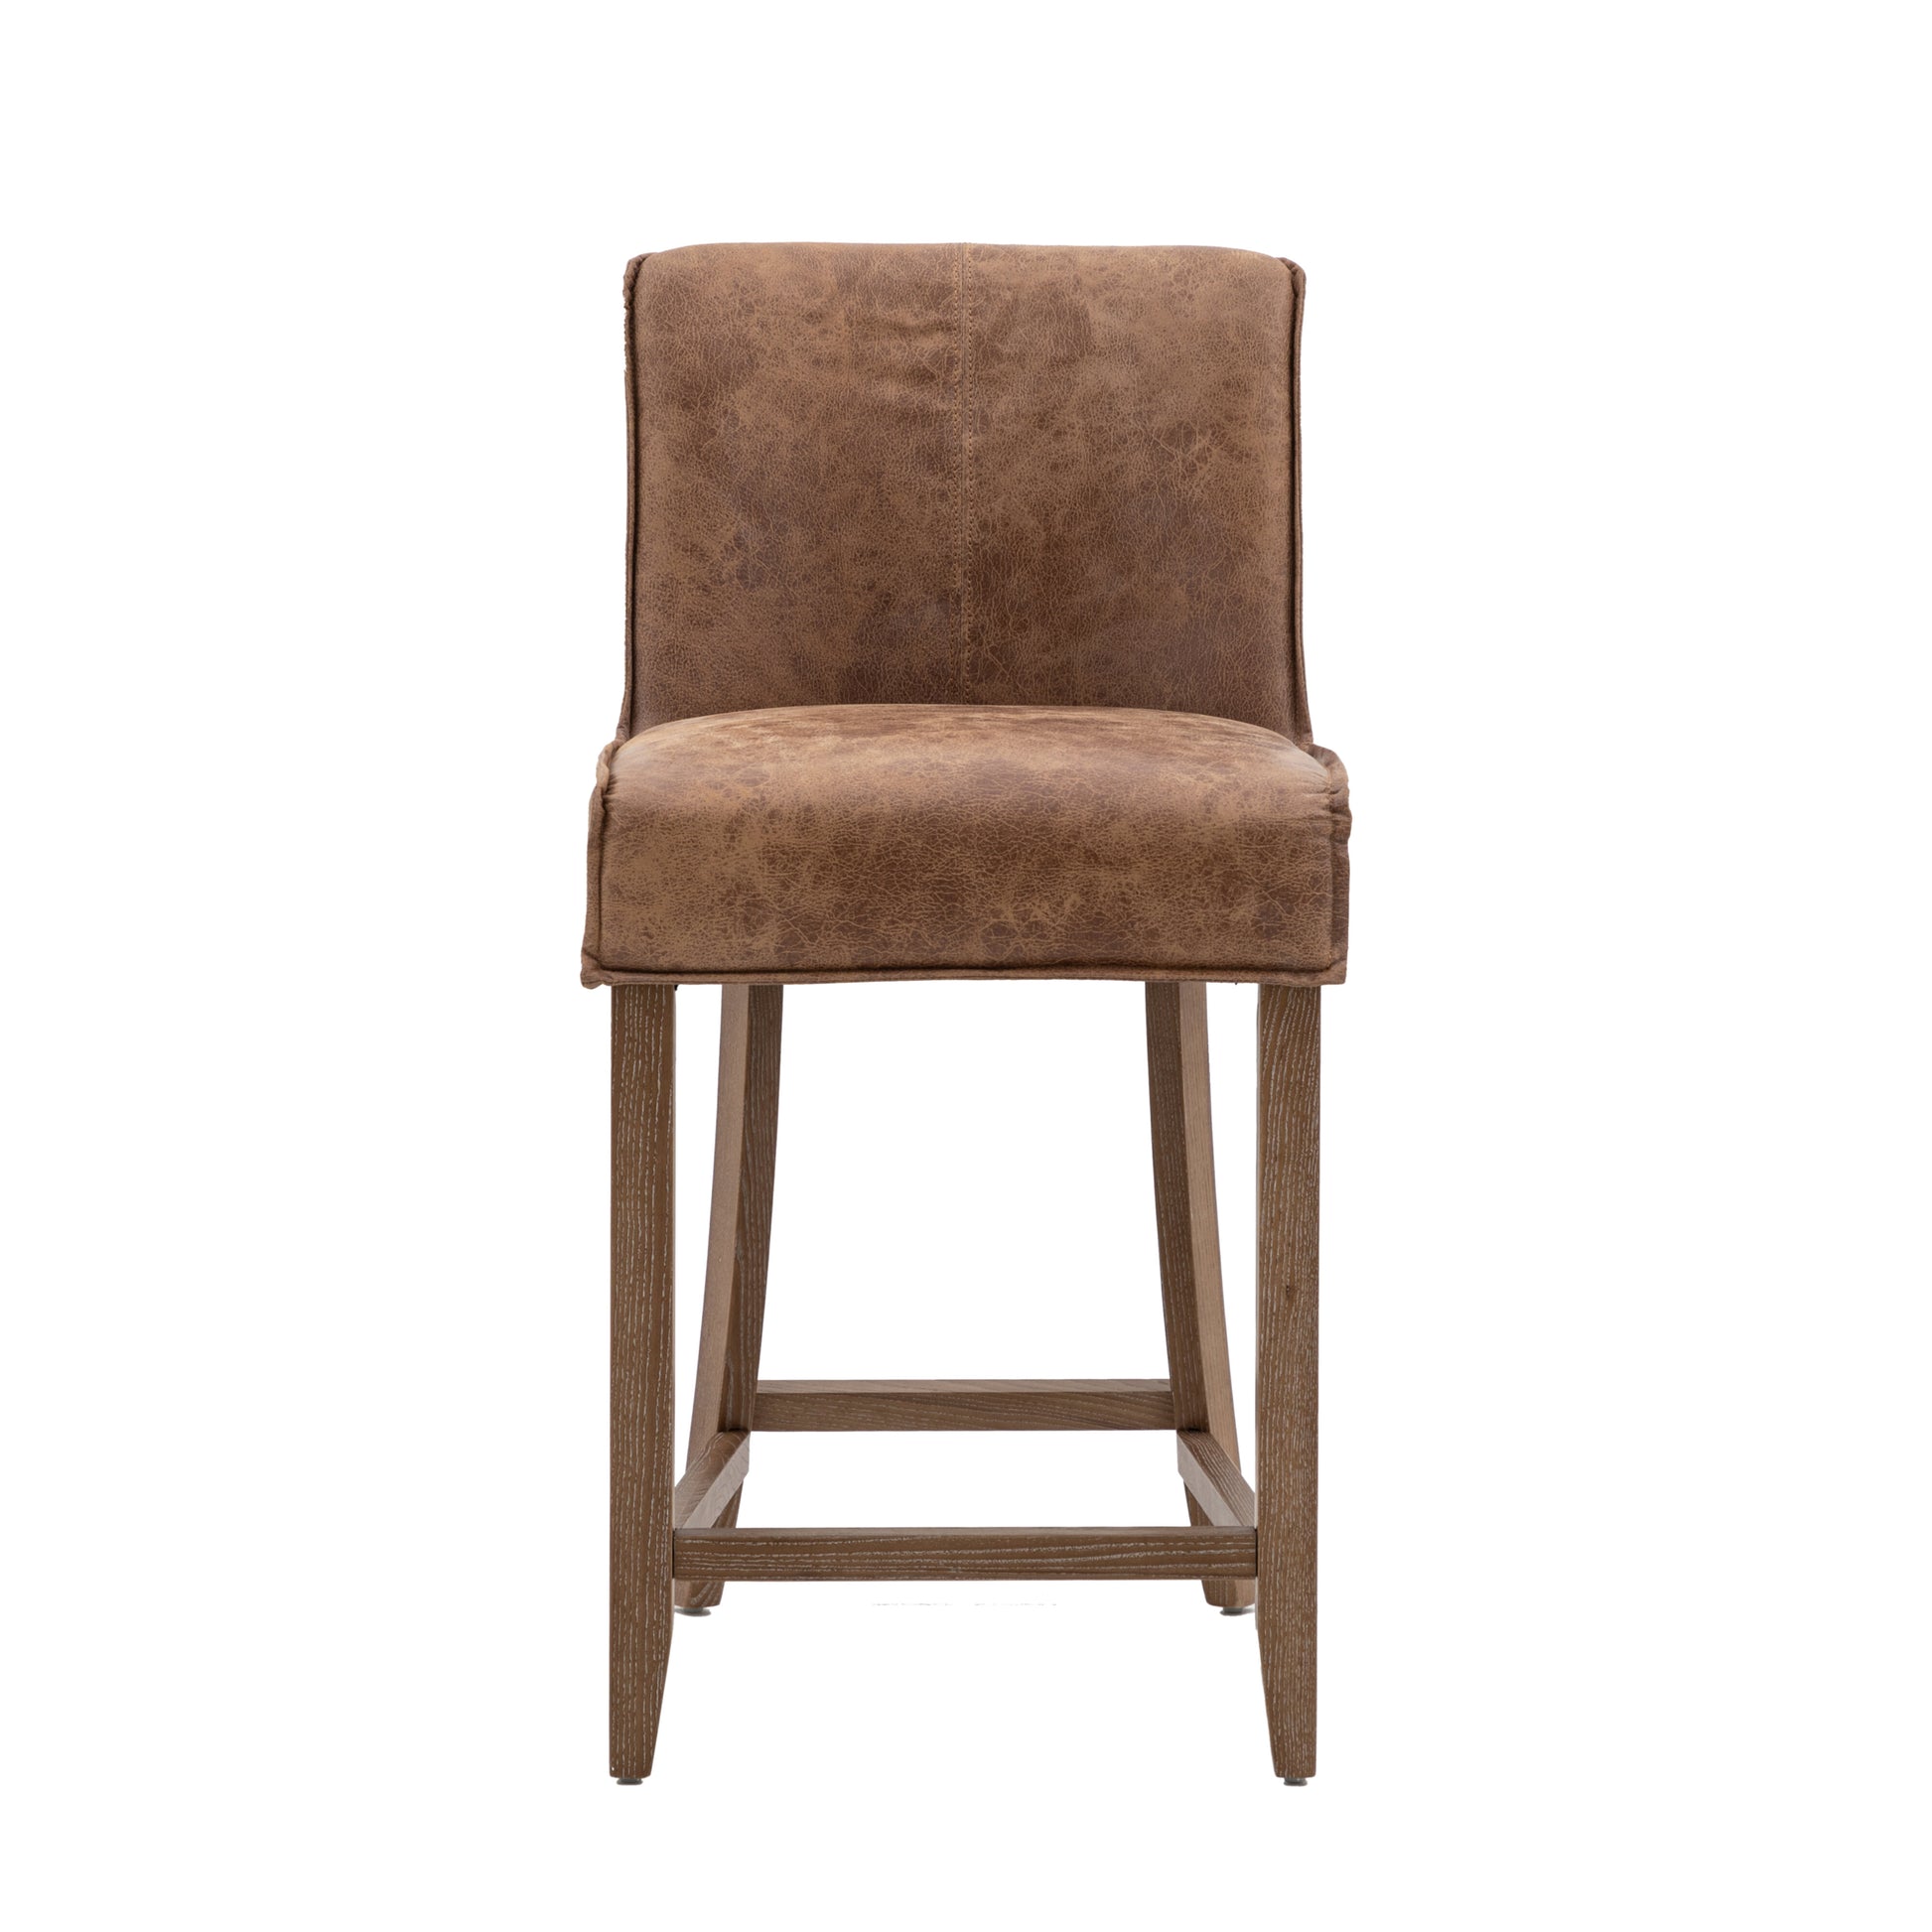 Tarnby Bar Stool | Brown Leather (2 Pack)